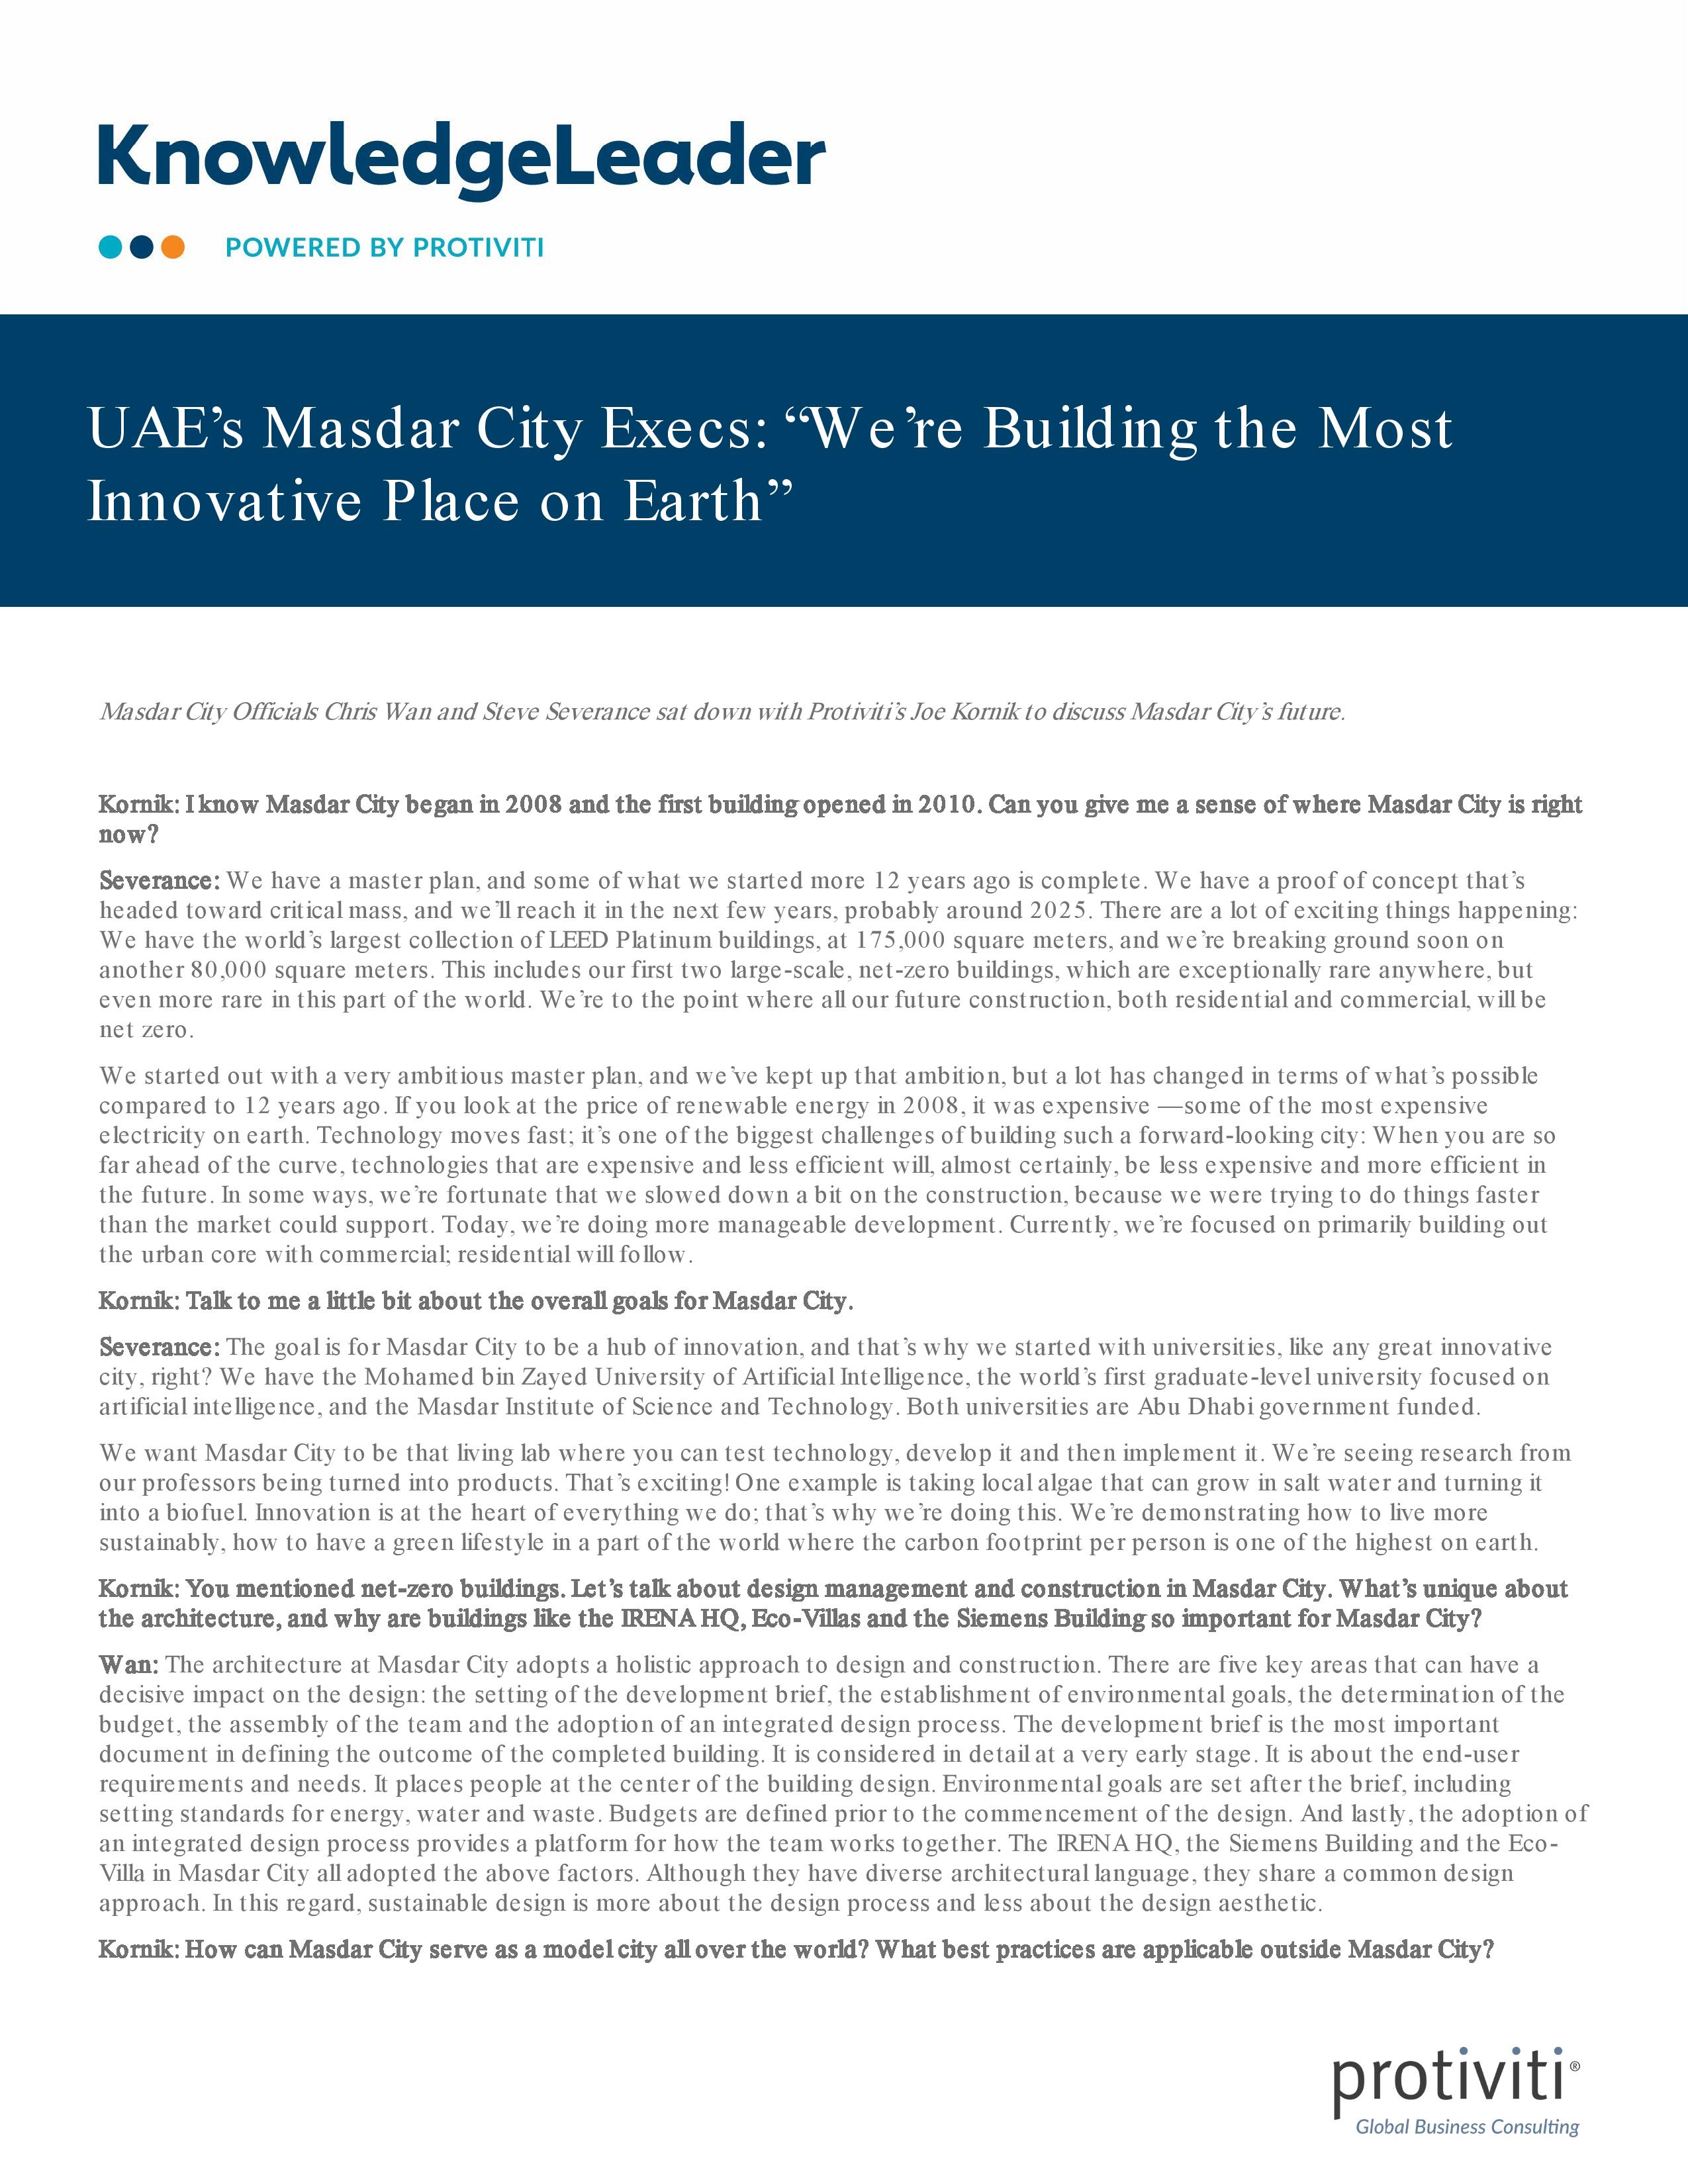 screenshot of the first page of UAE’s Masdar City Execs “We’re Building the Most Innovative Place on Earth”